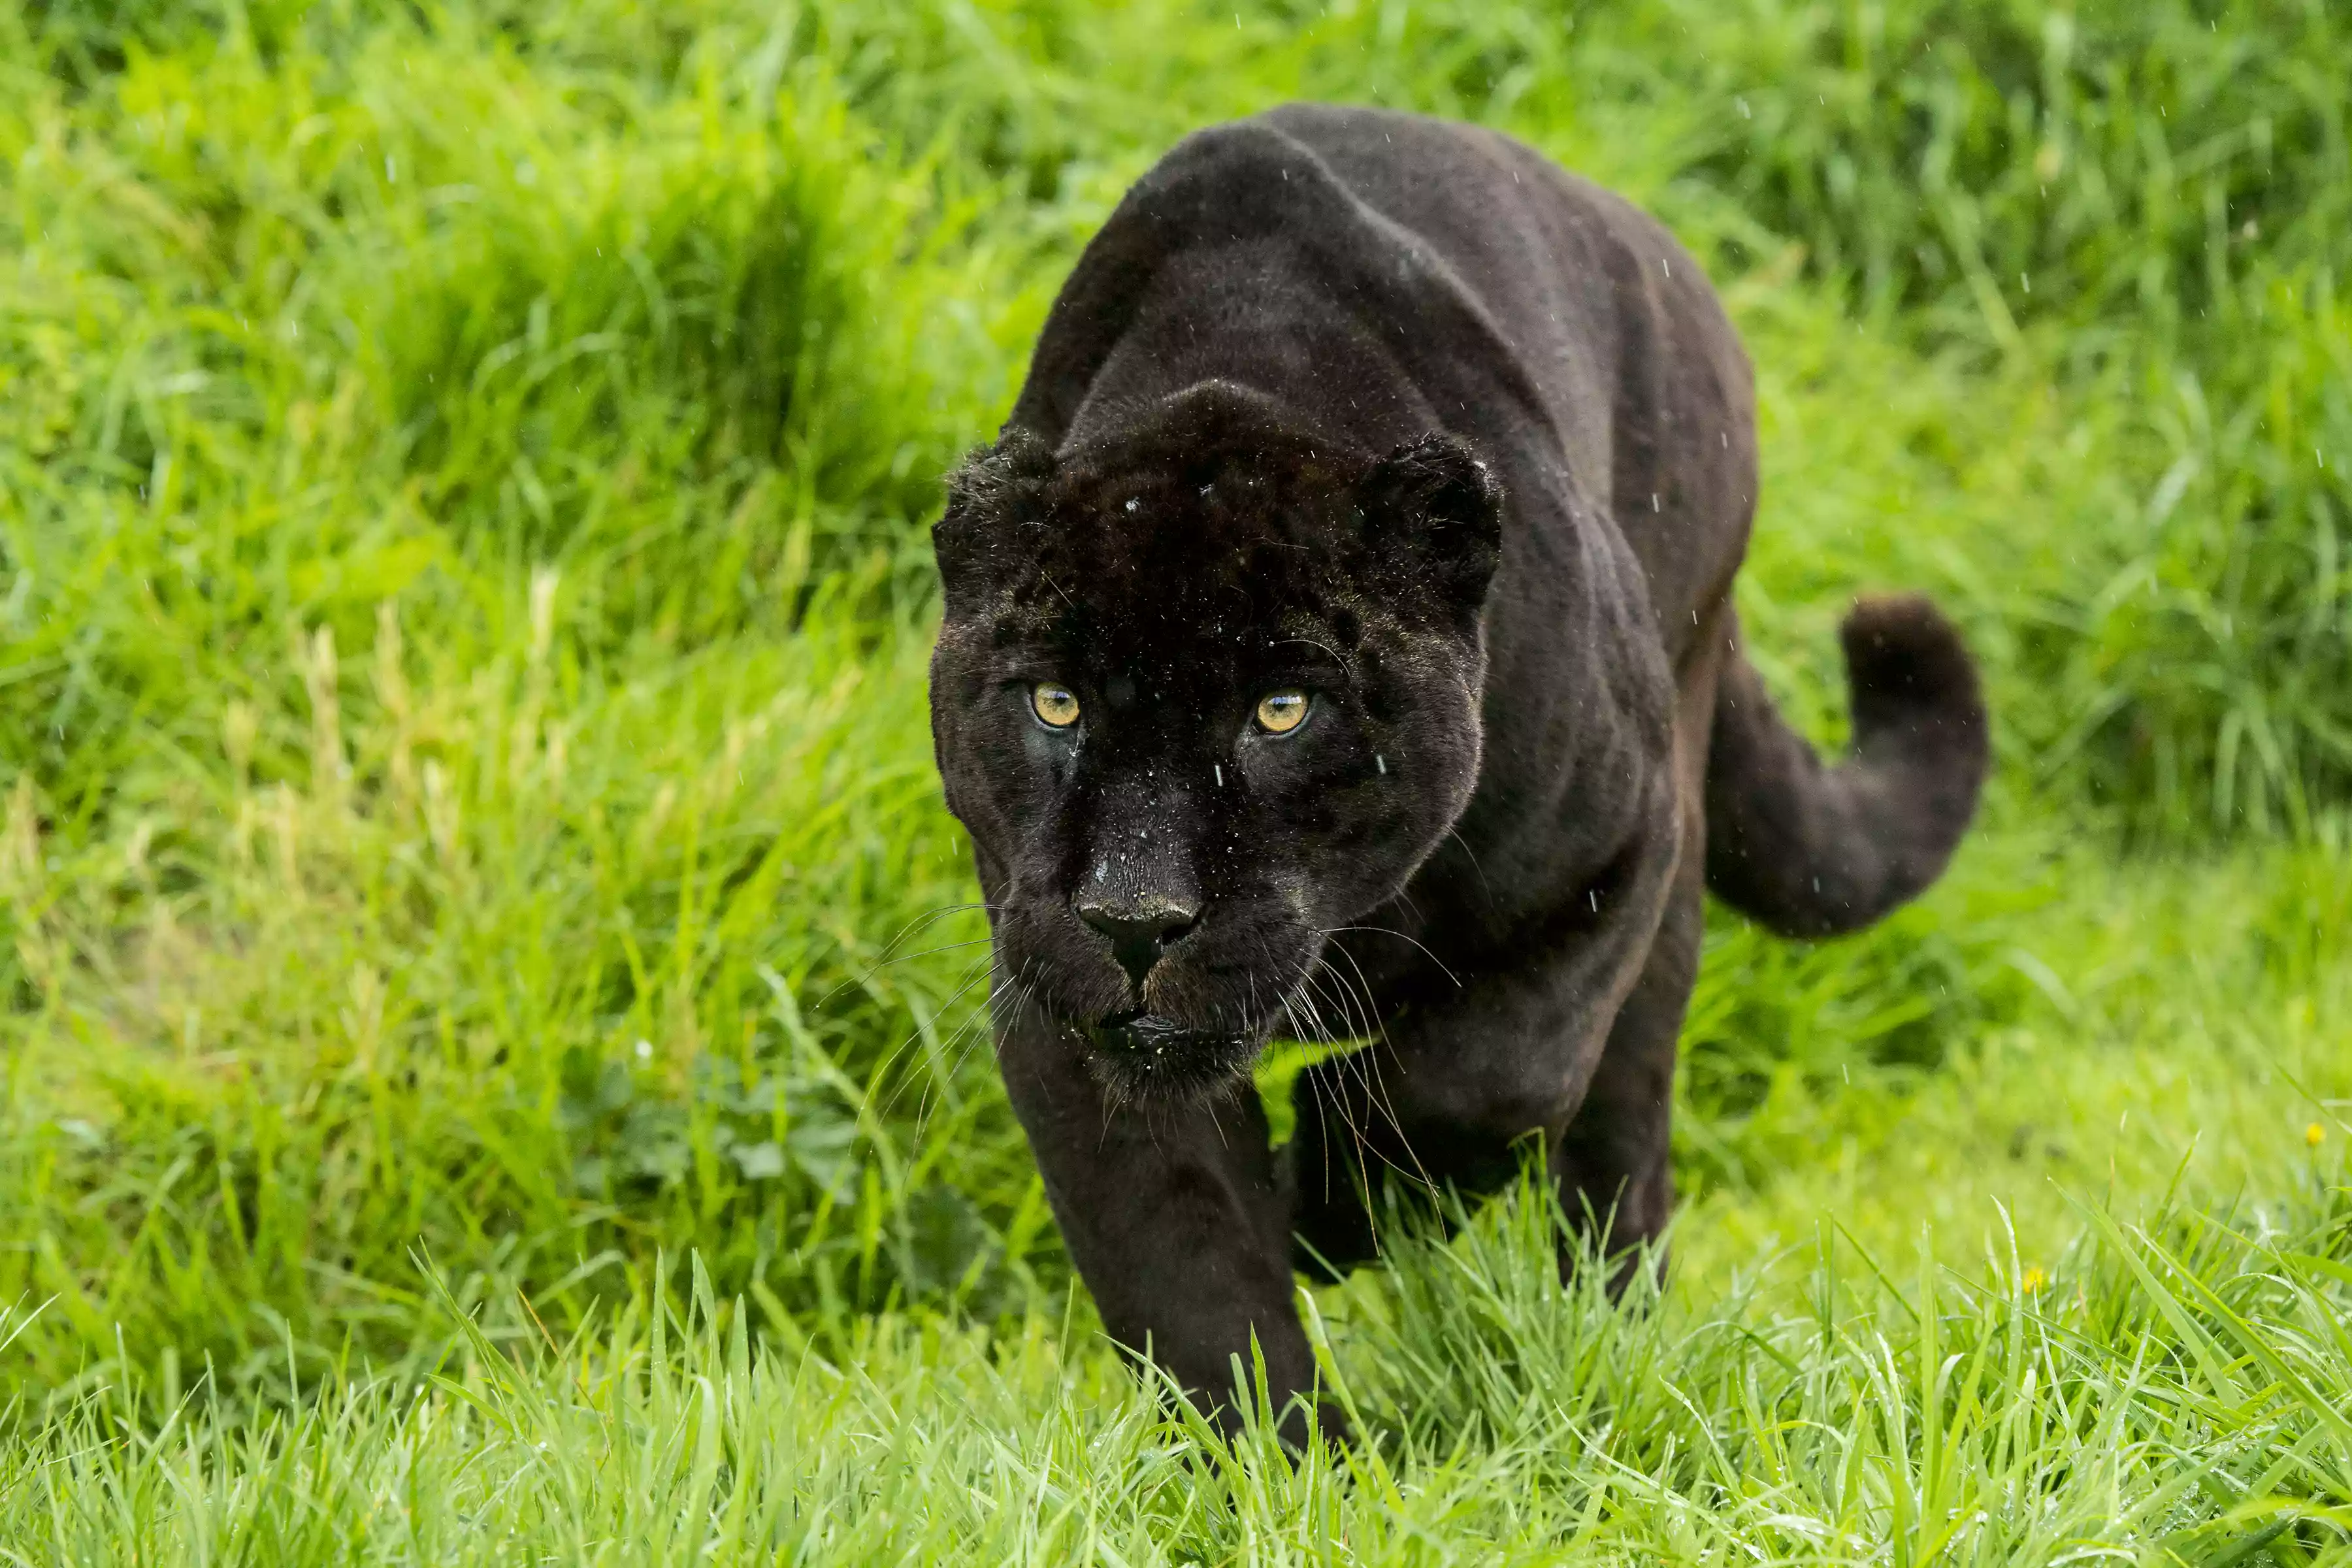 A black, or melanistic, panther in the grass